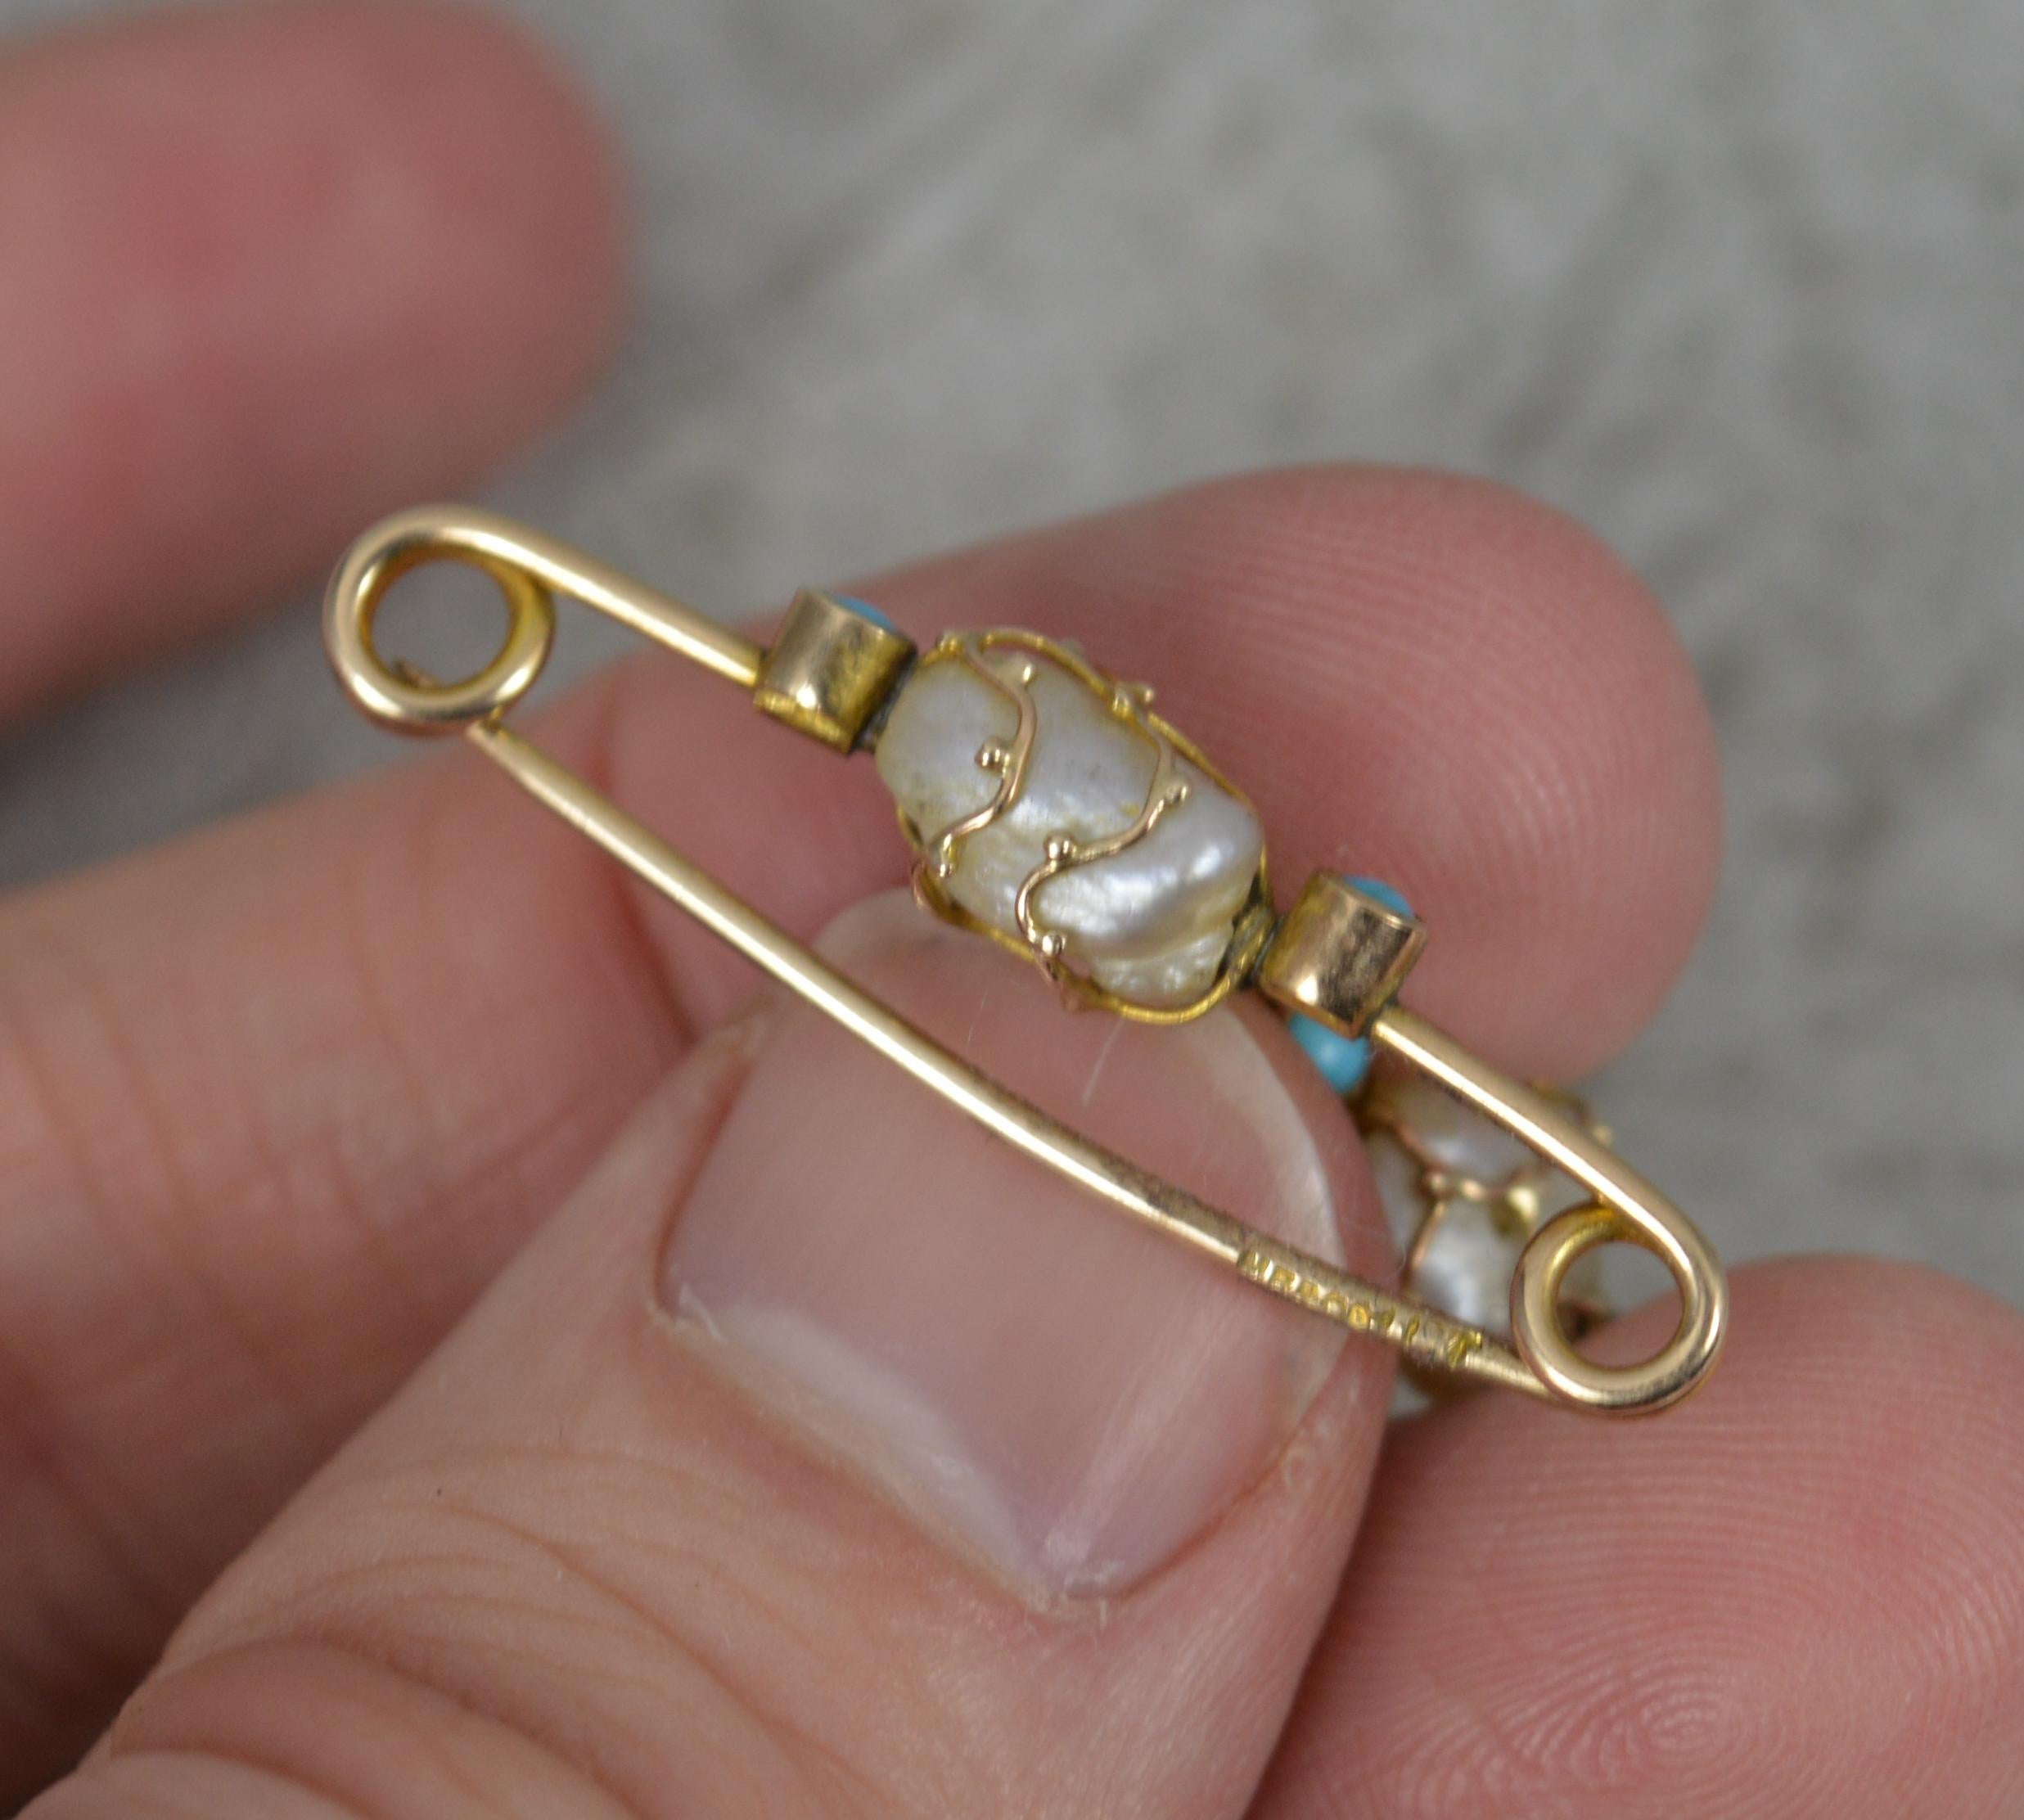 A beautiful true antique brooch.
​Solid 9 carat gold example. Designed with a caged free form pearl to pin, with turquoise each side. Below hangs a further caged free form pearl on a lavalier chain.
2.1 grams, 3.3cm approx.
By Murrle